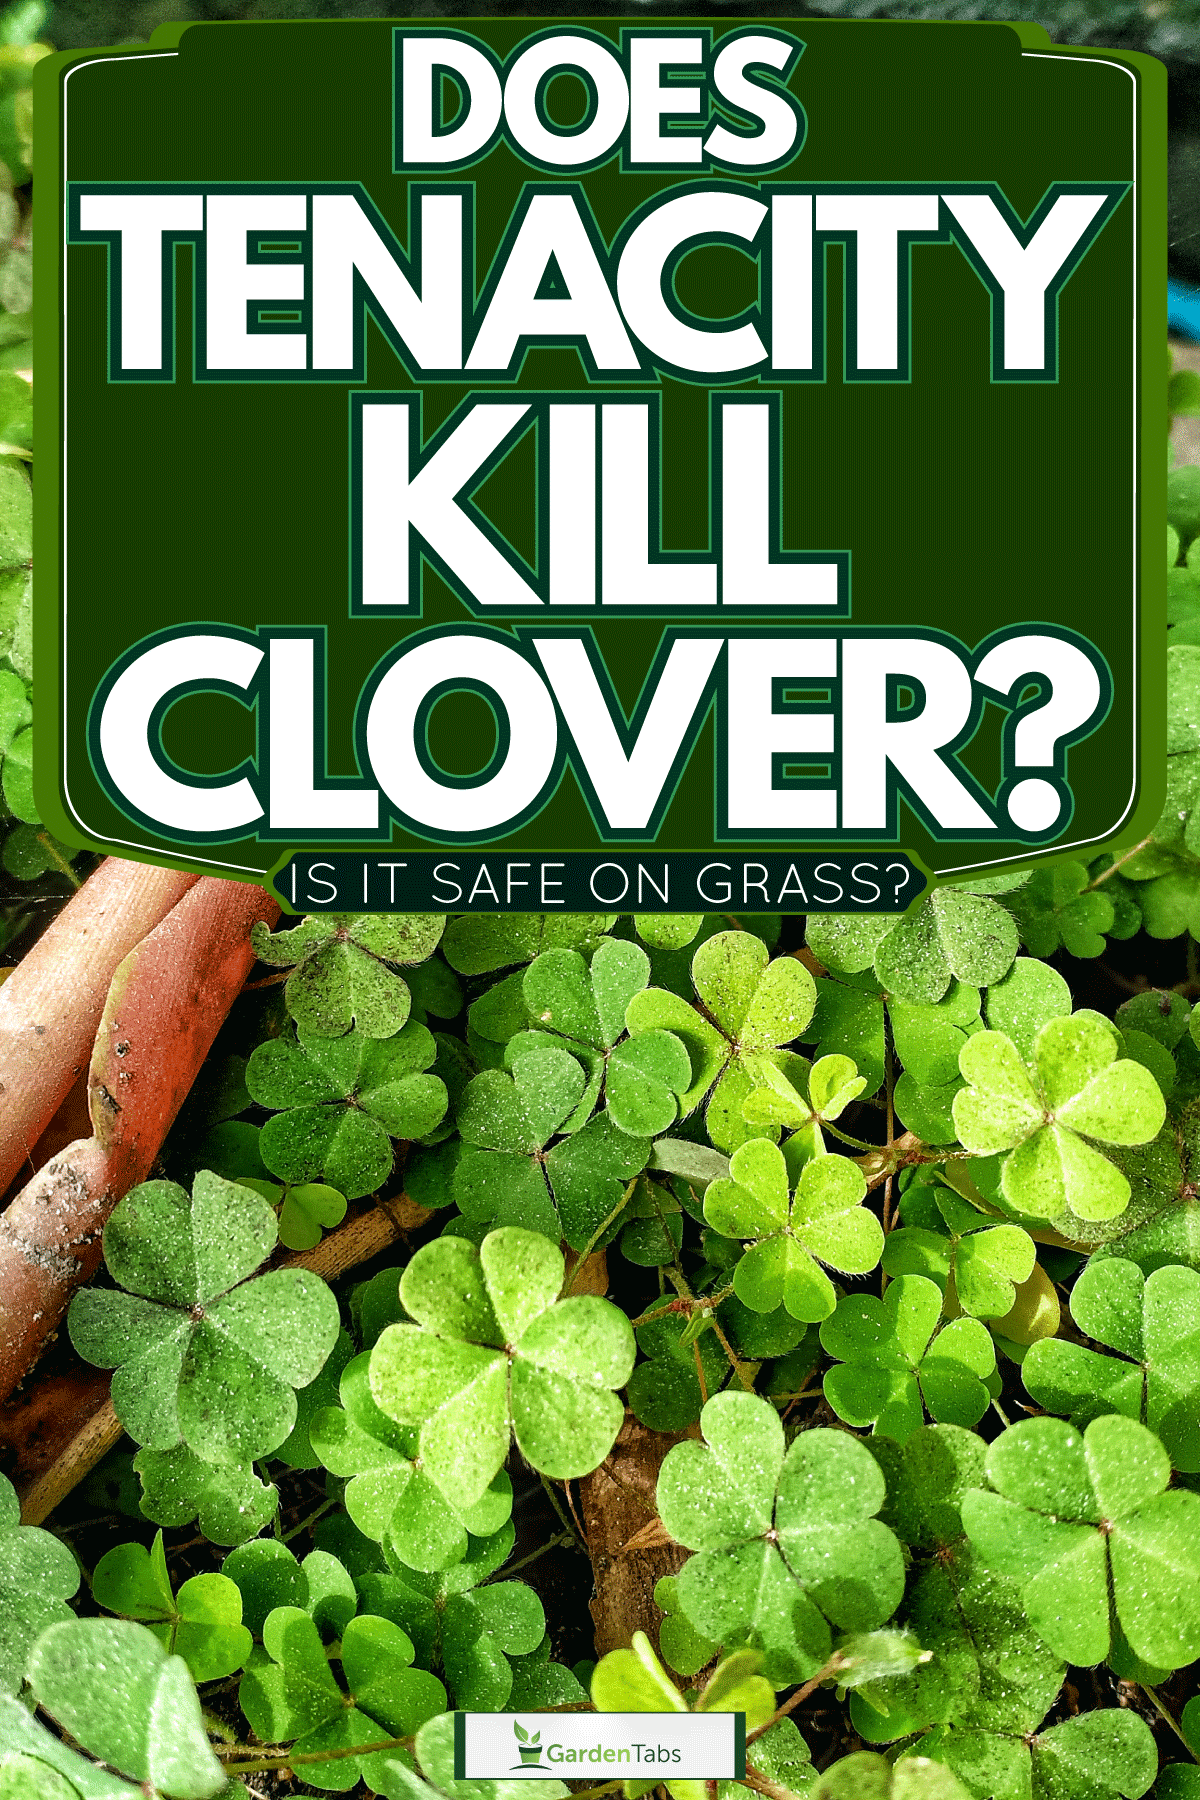 Infestation of clover weed, Does Tenacity Kill Clover? [Is It Safe On Grass?]